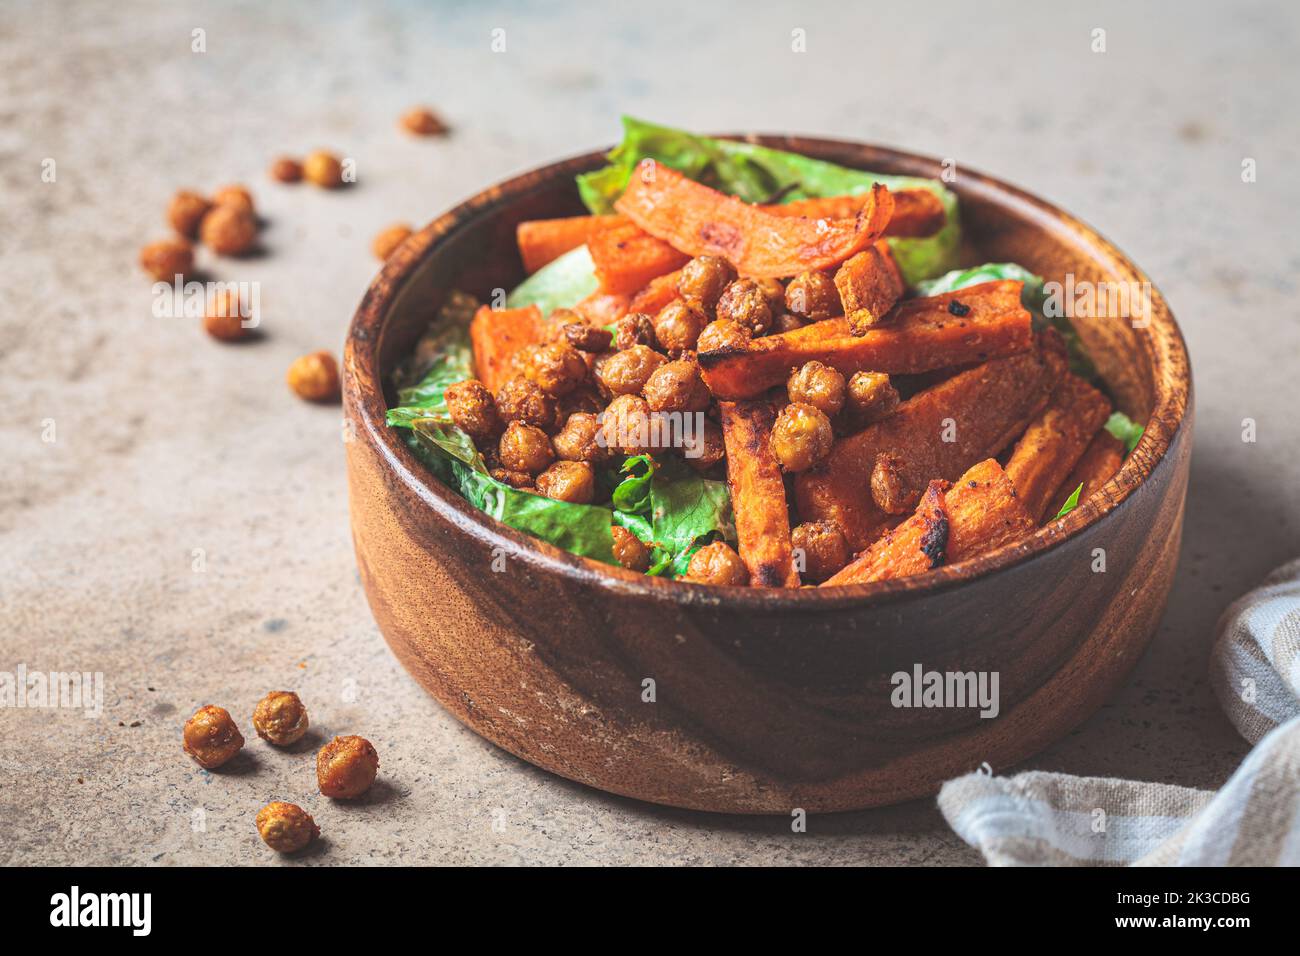 Baked sweet potato wedges and spicy fried chickpea salad in a wooden bowl. Plant based food concept. Stock Photo